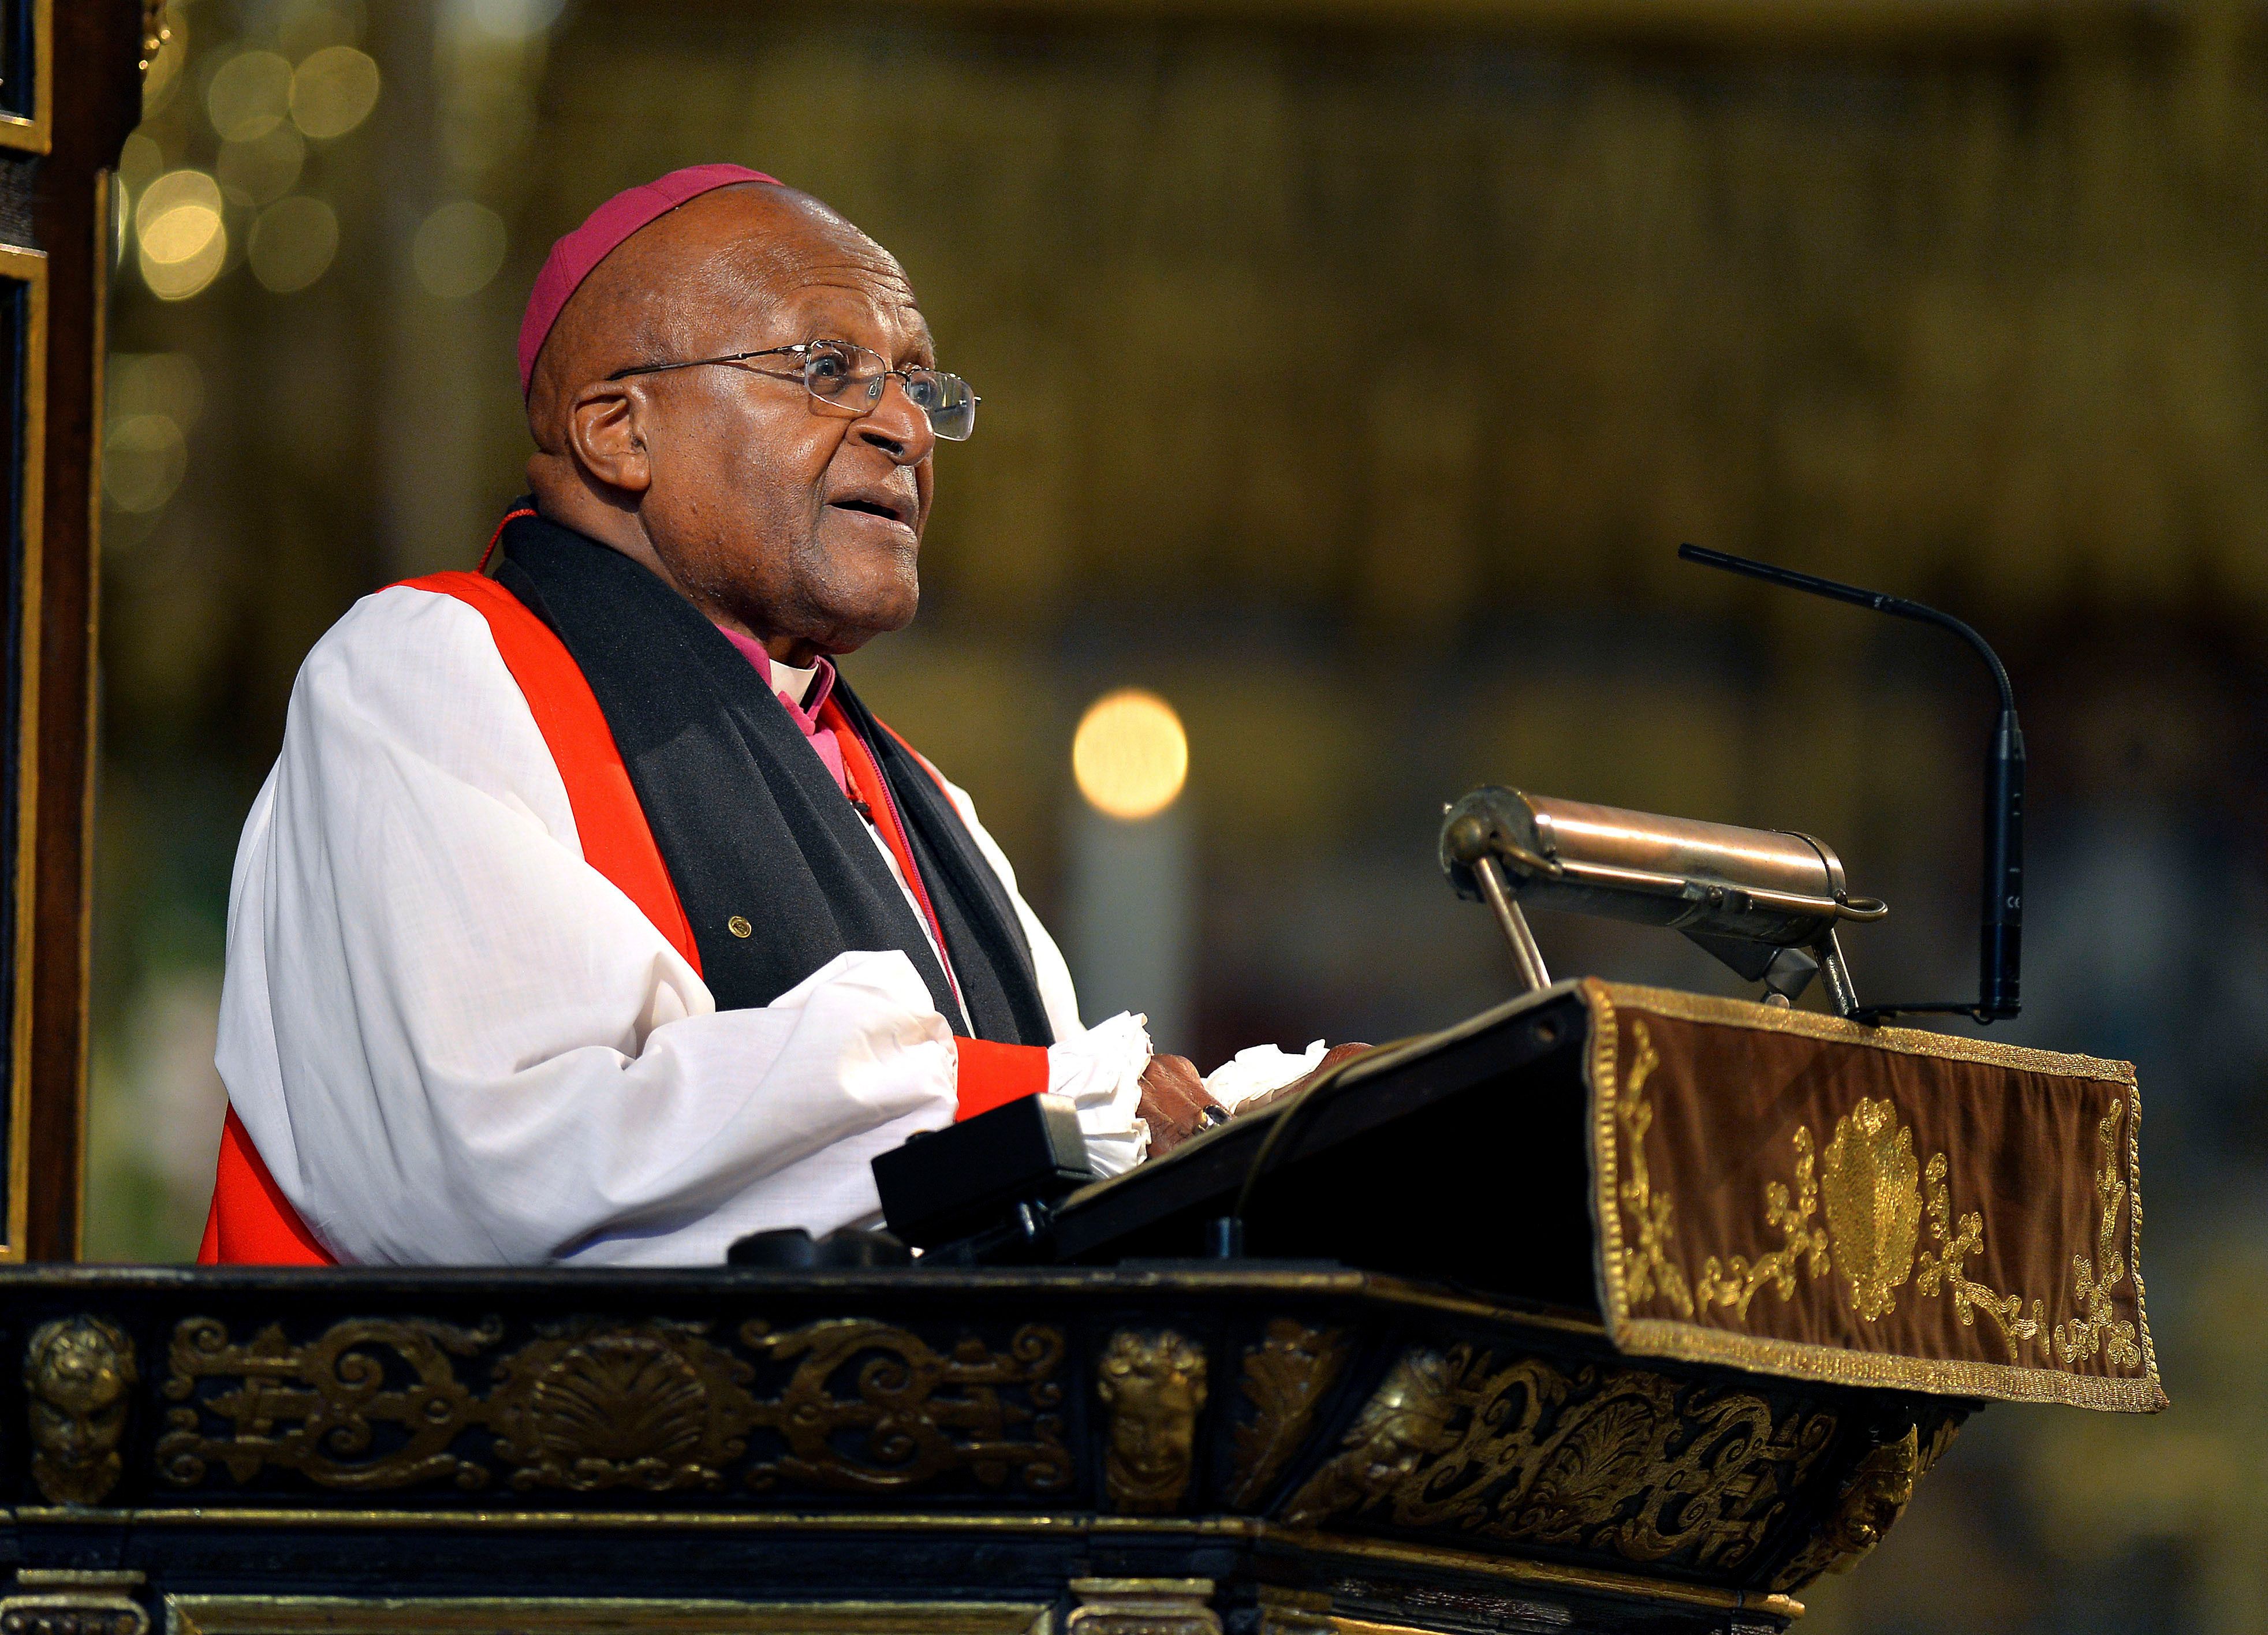 Desmond Tutu makes an address at Westminster Abbey in London during the memorial service for the former South African President Nelson Mandela, Monday March 3, 2014. (John Stillwell, Pool Photo via AP, File)